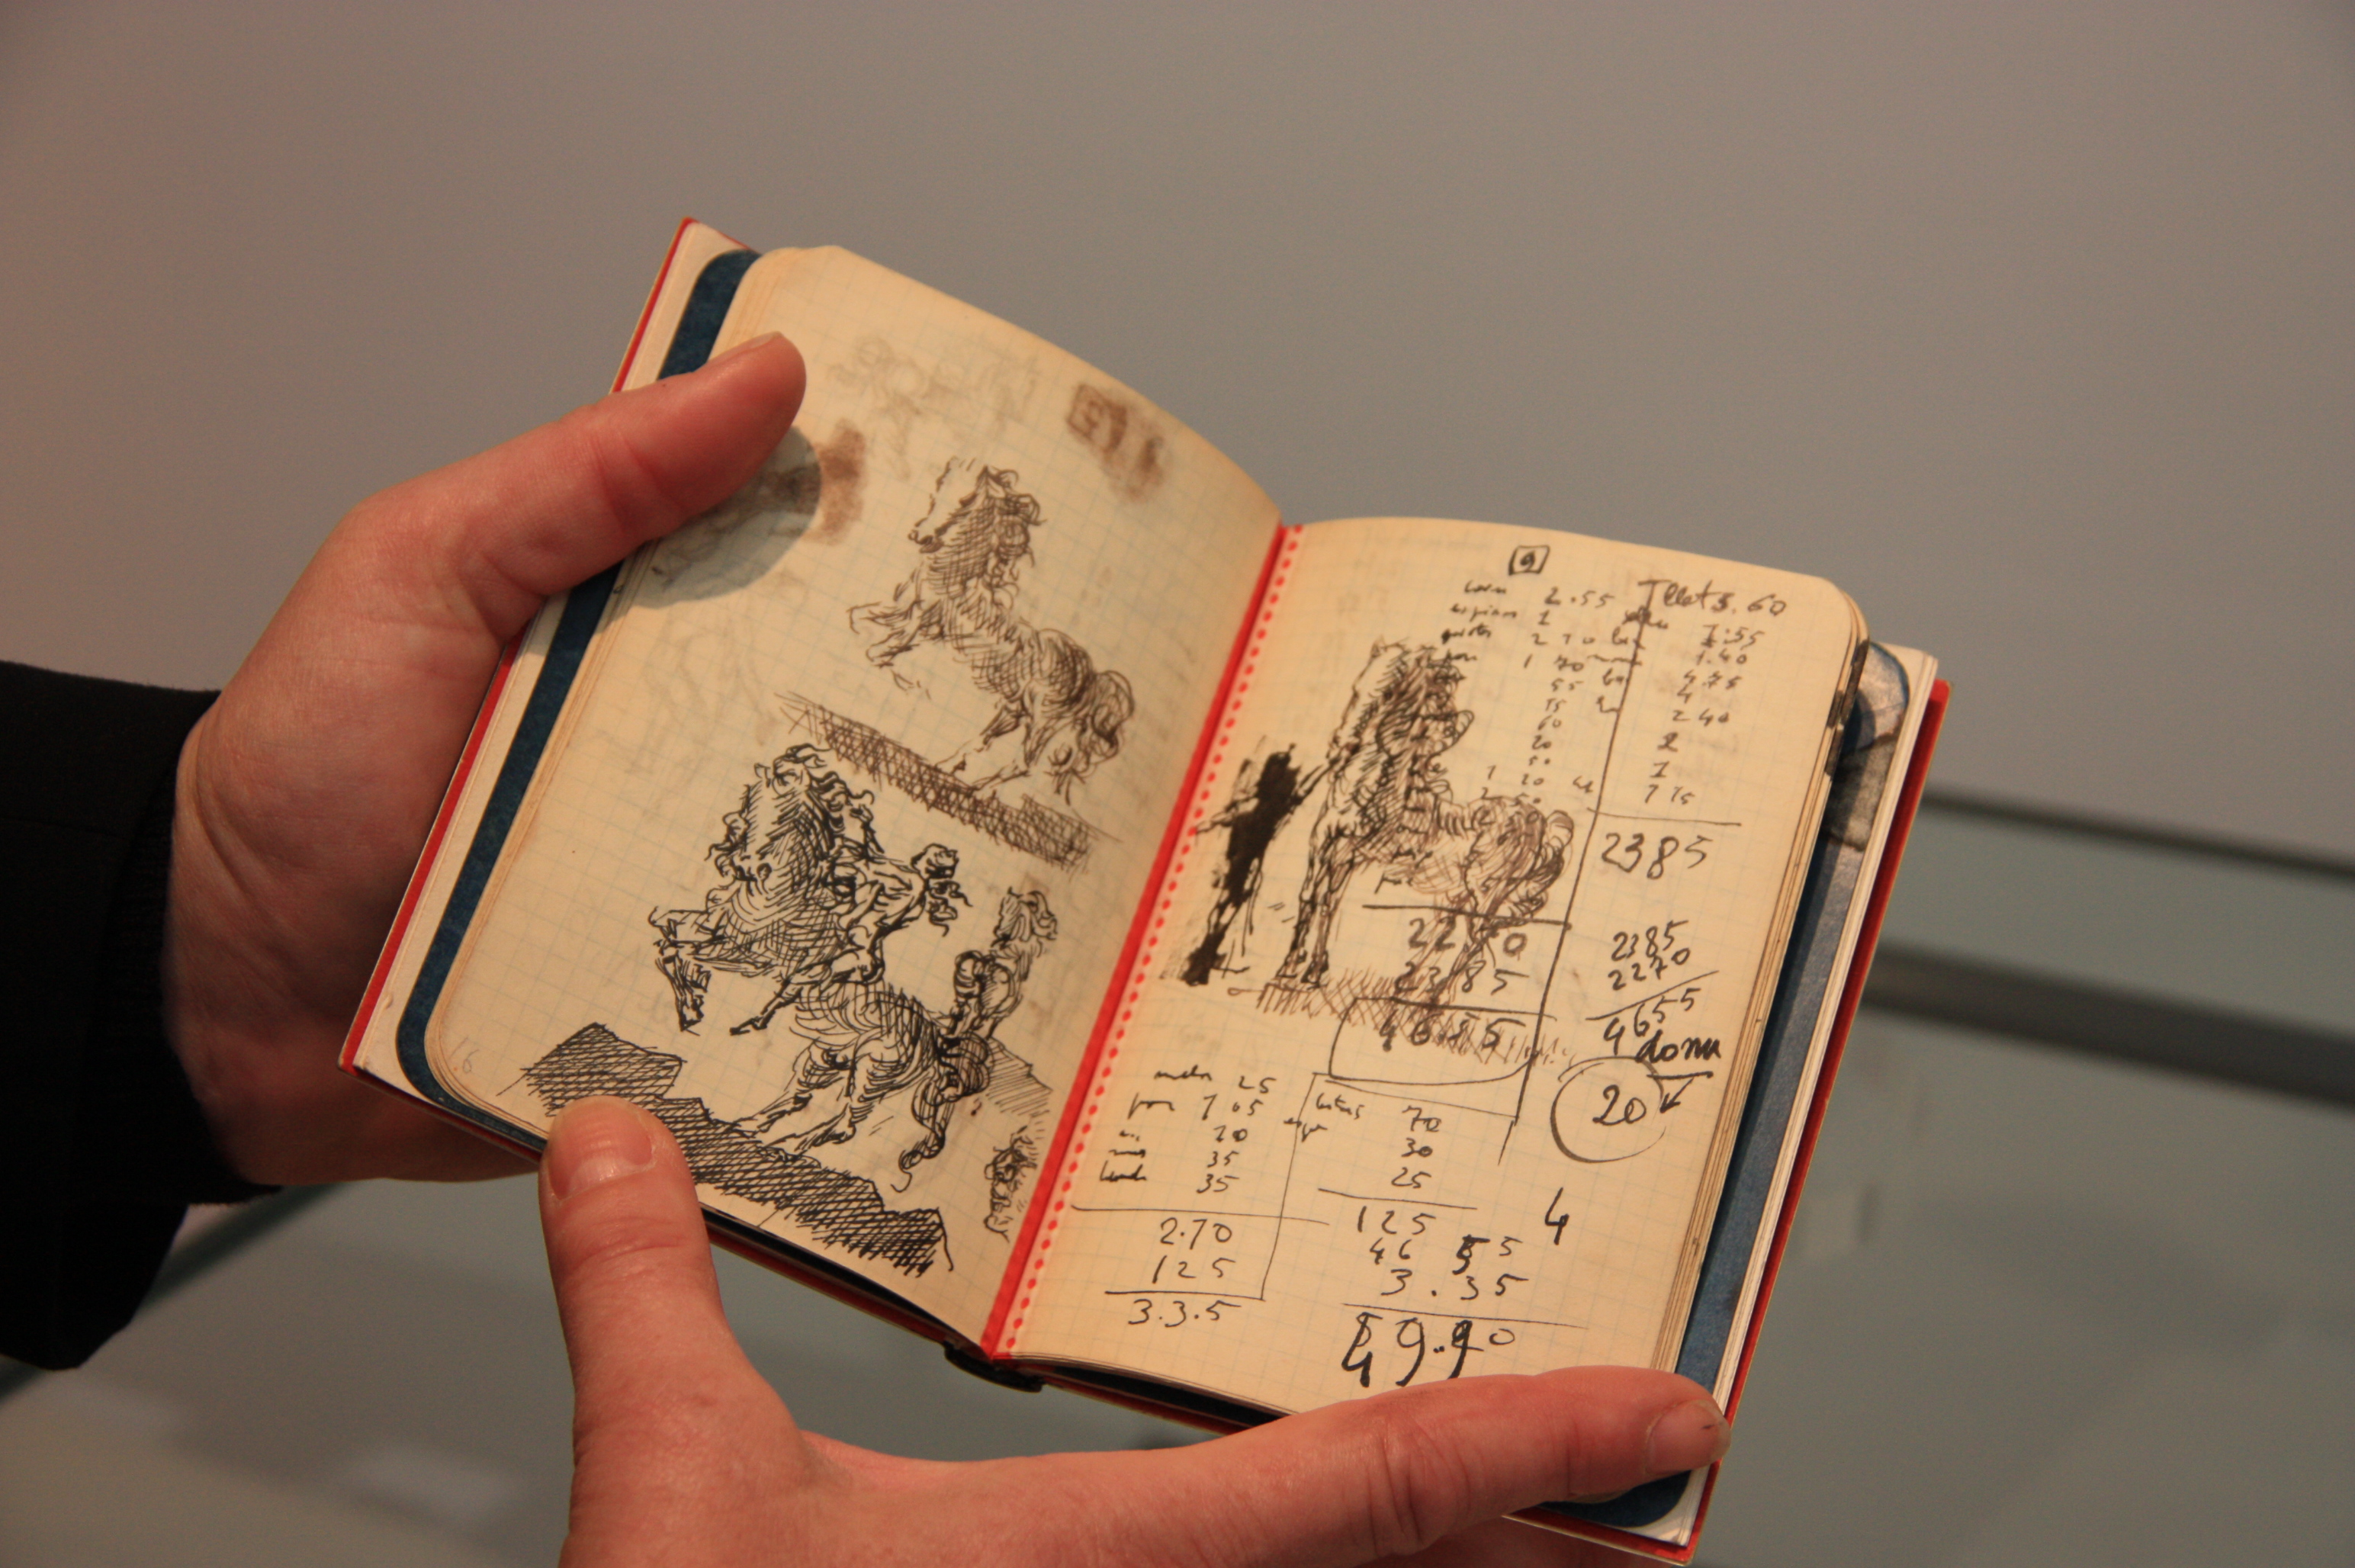 Image of an unpublished diary by Salvador Dalí, to be auctioned in Paris (by ACN)